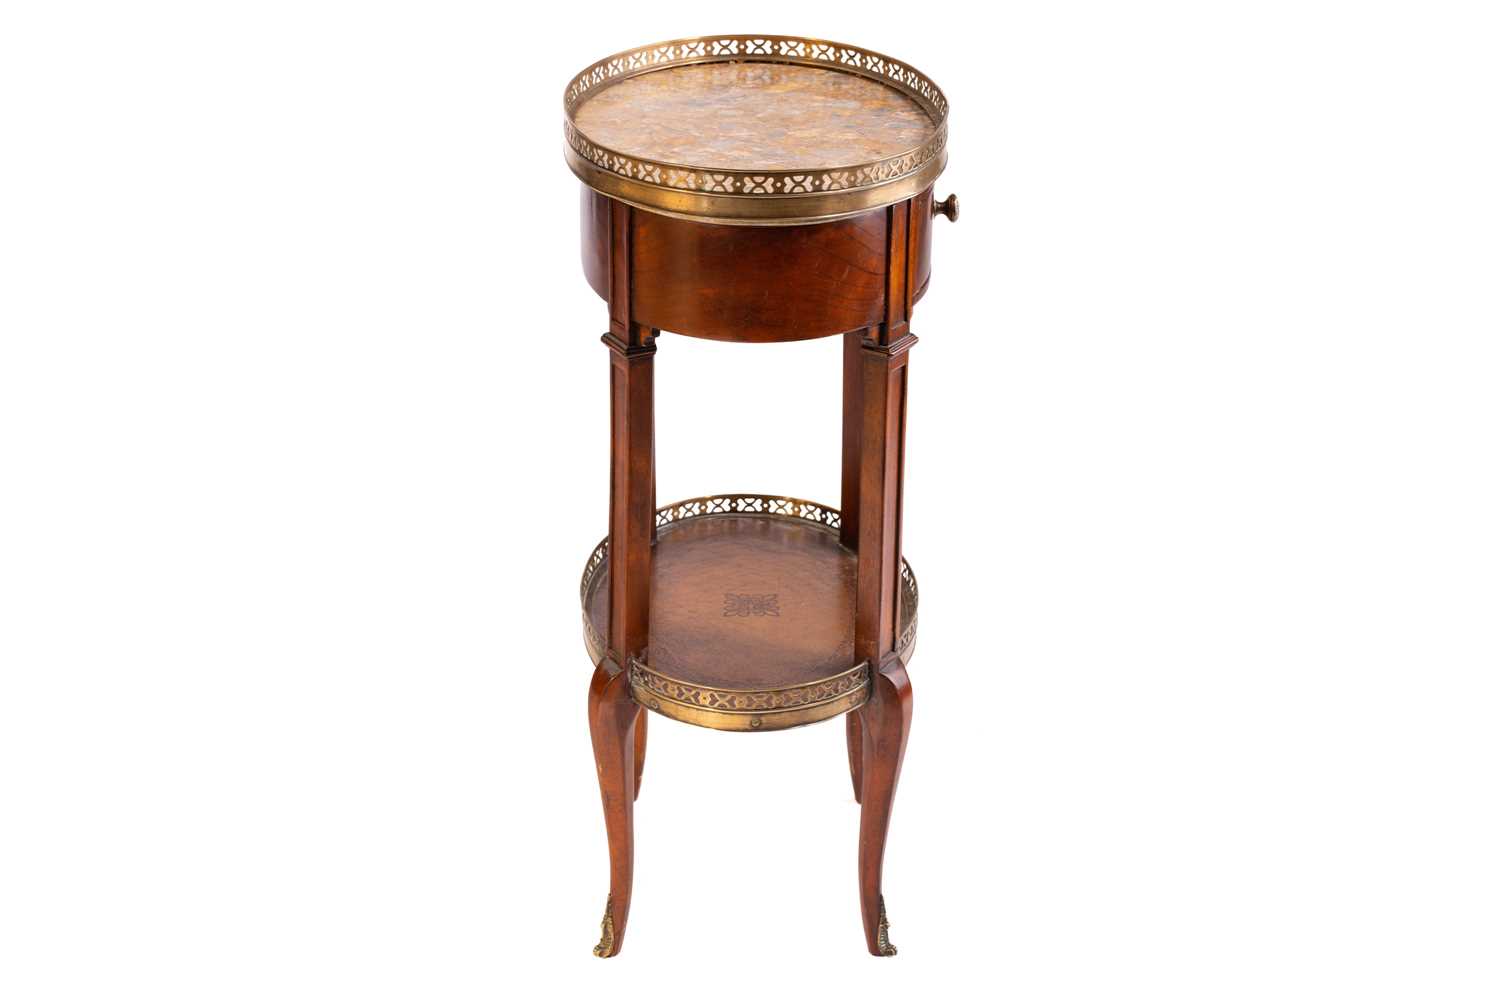 A French Napoleon III style mahogany oval table en chiffonier with marble top, 20th century, with - Image 5 of 10